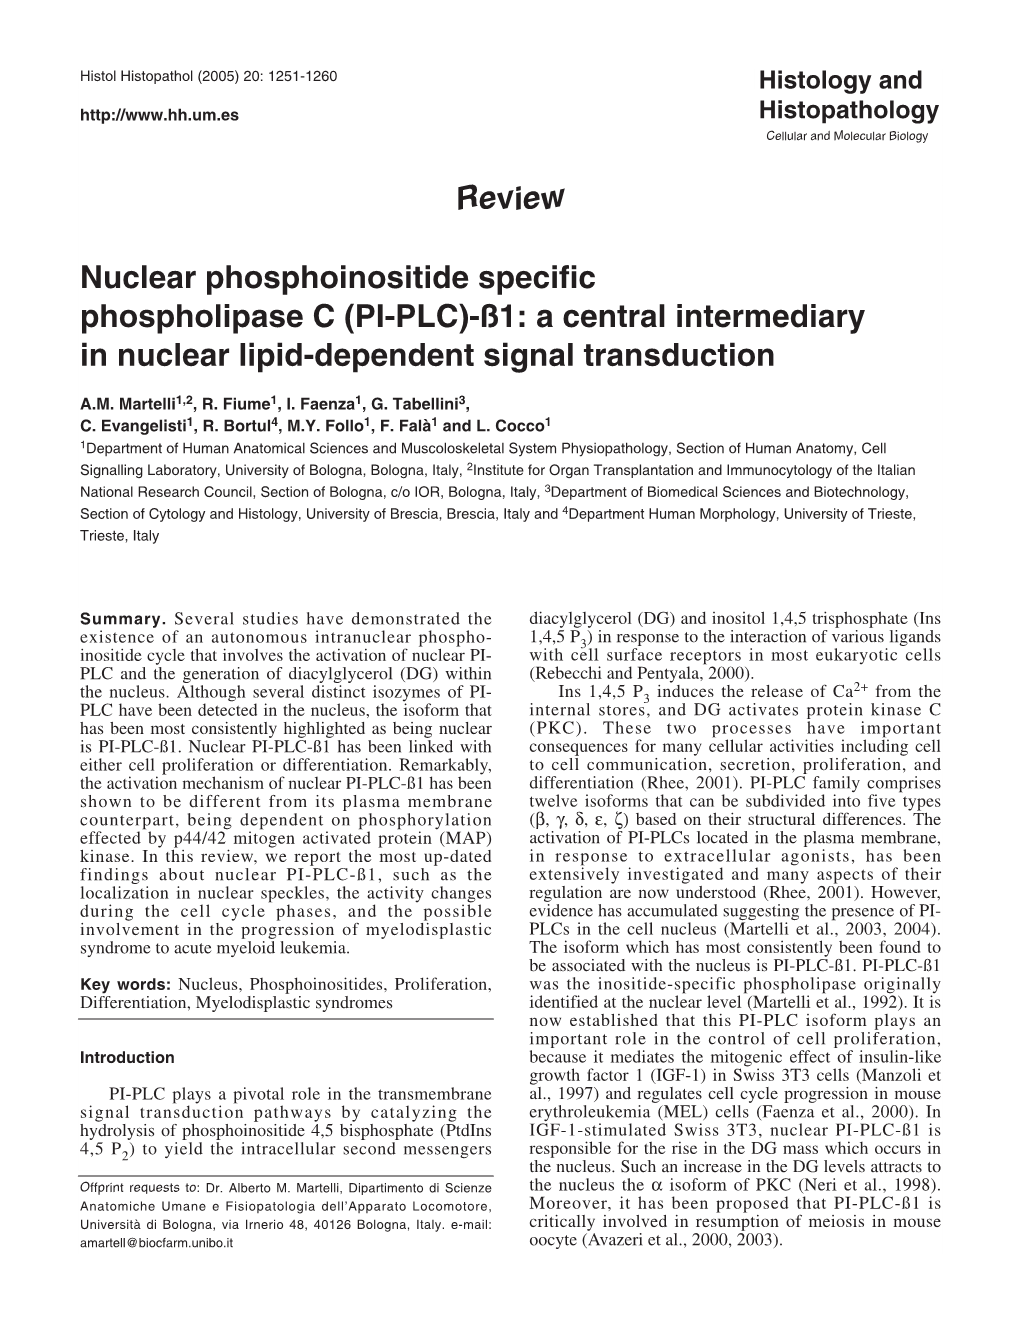 Review Nuclear Phosphoinositide Specific Phospholipase C